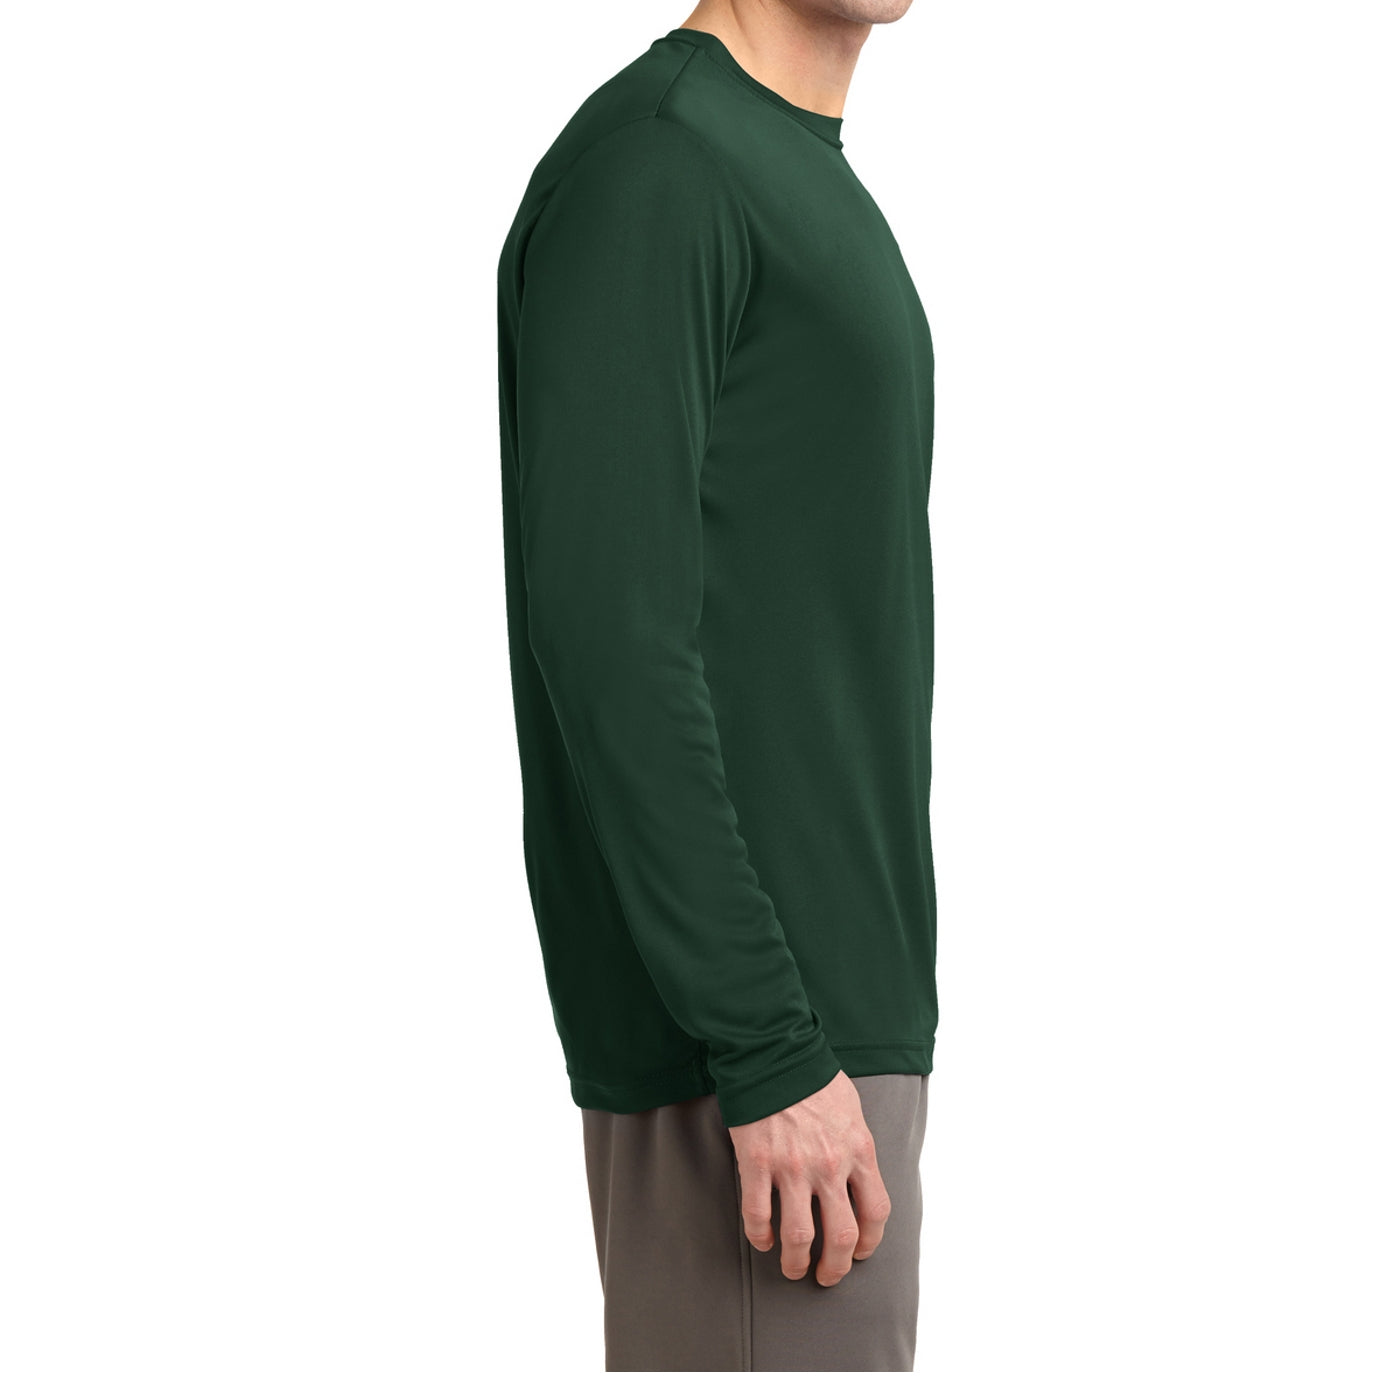 Men's Long Sleeve PosiCharge Competitor Tee - Forest Green